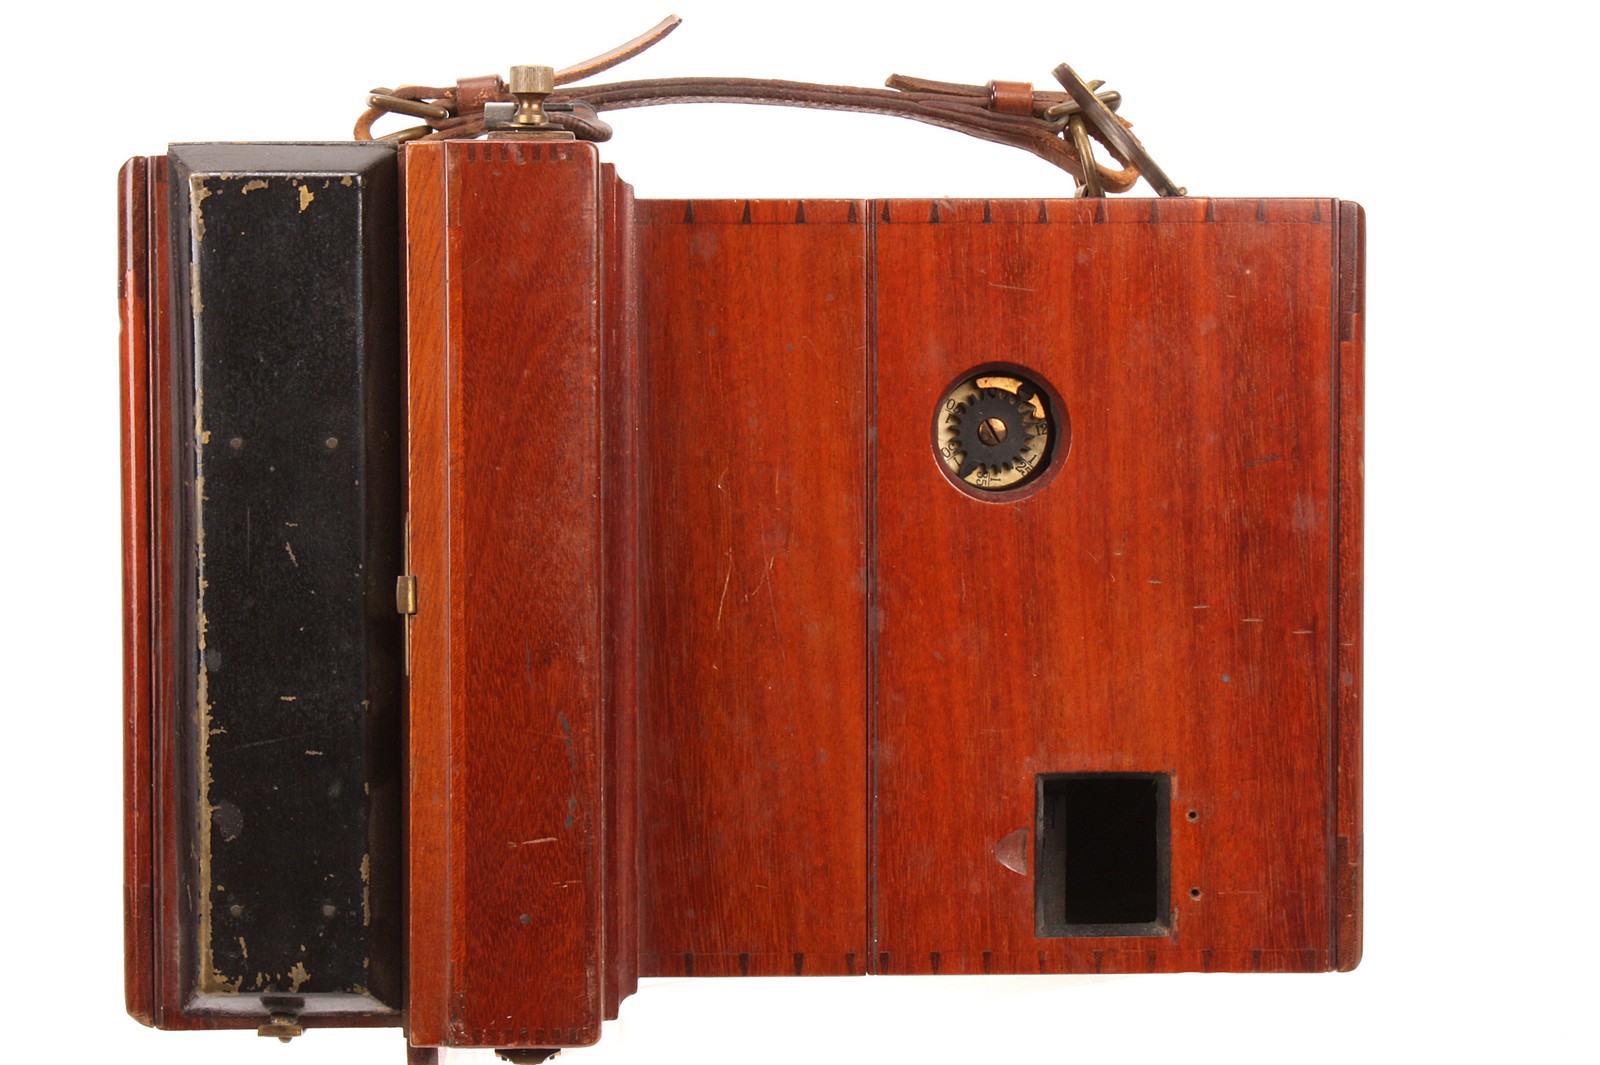 A W. W. Rouch & Co. Eureka Rollerblind Mahogany Detective Camera, 4.5x6.4”, with unmarked rotrary - Image 2 of 3